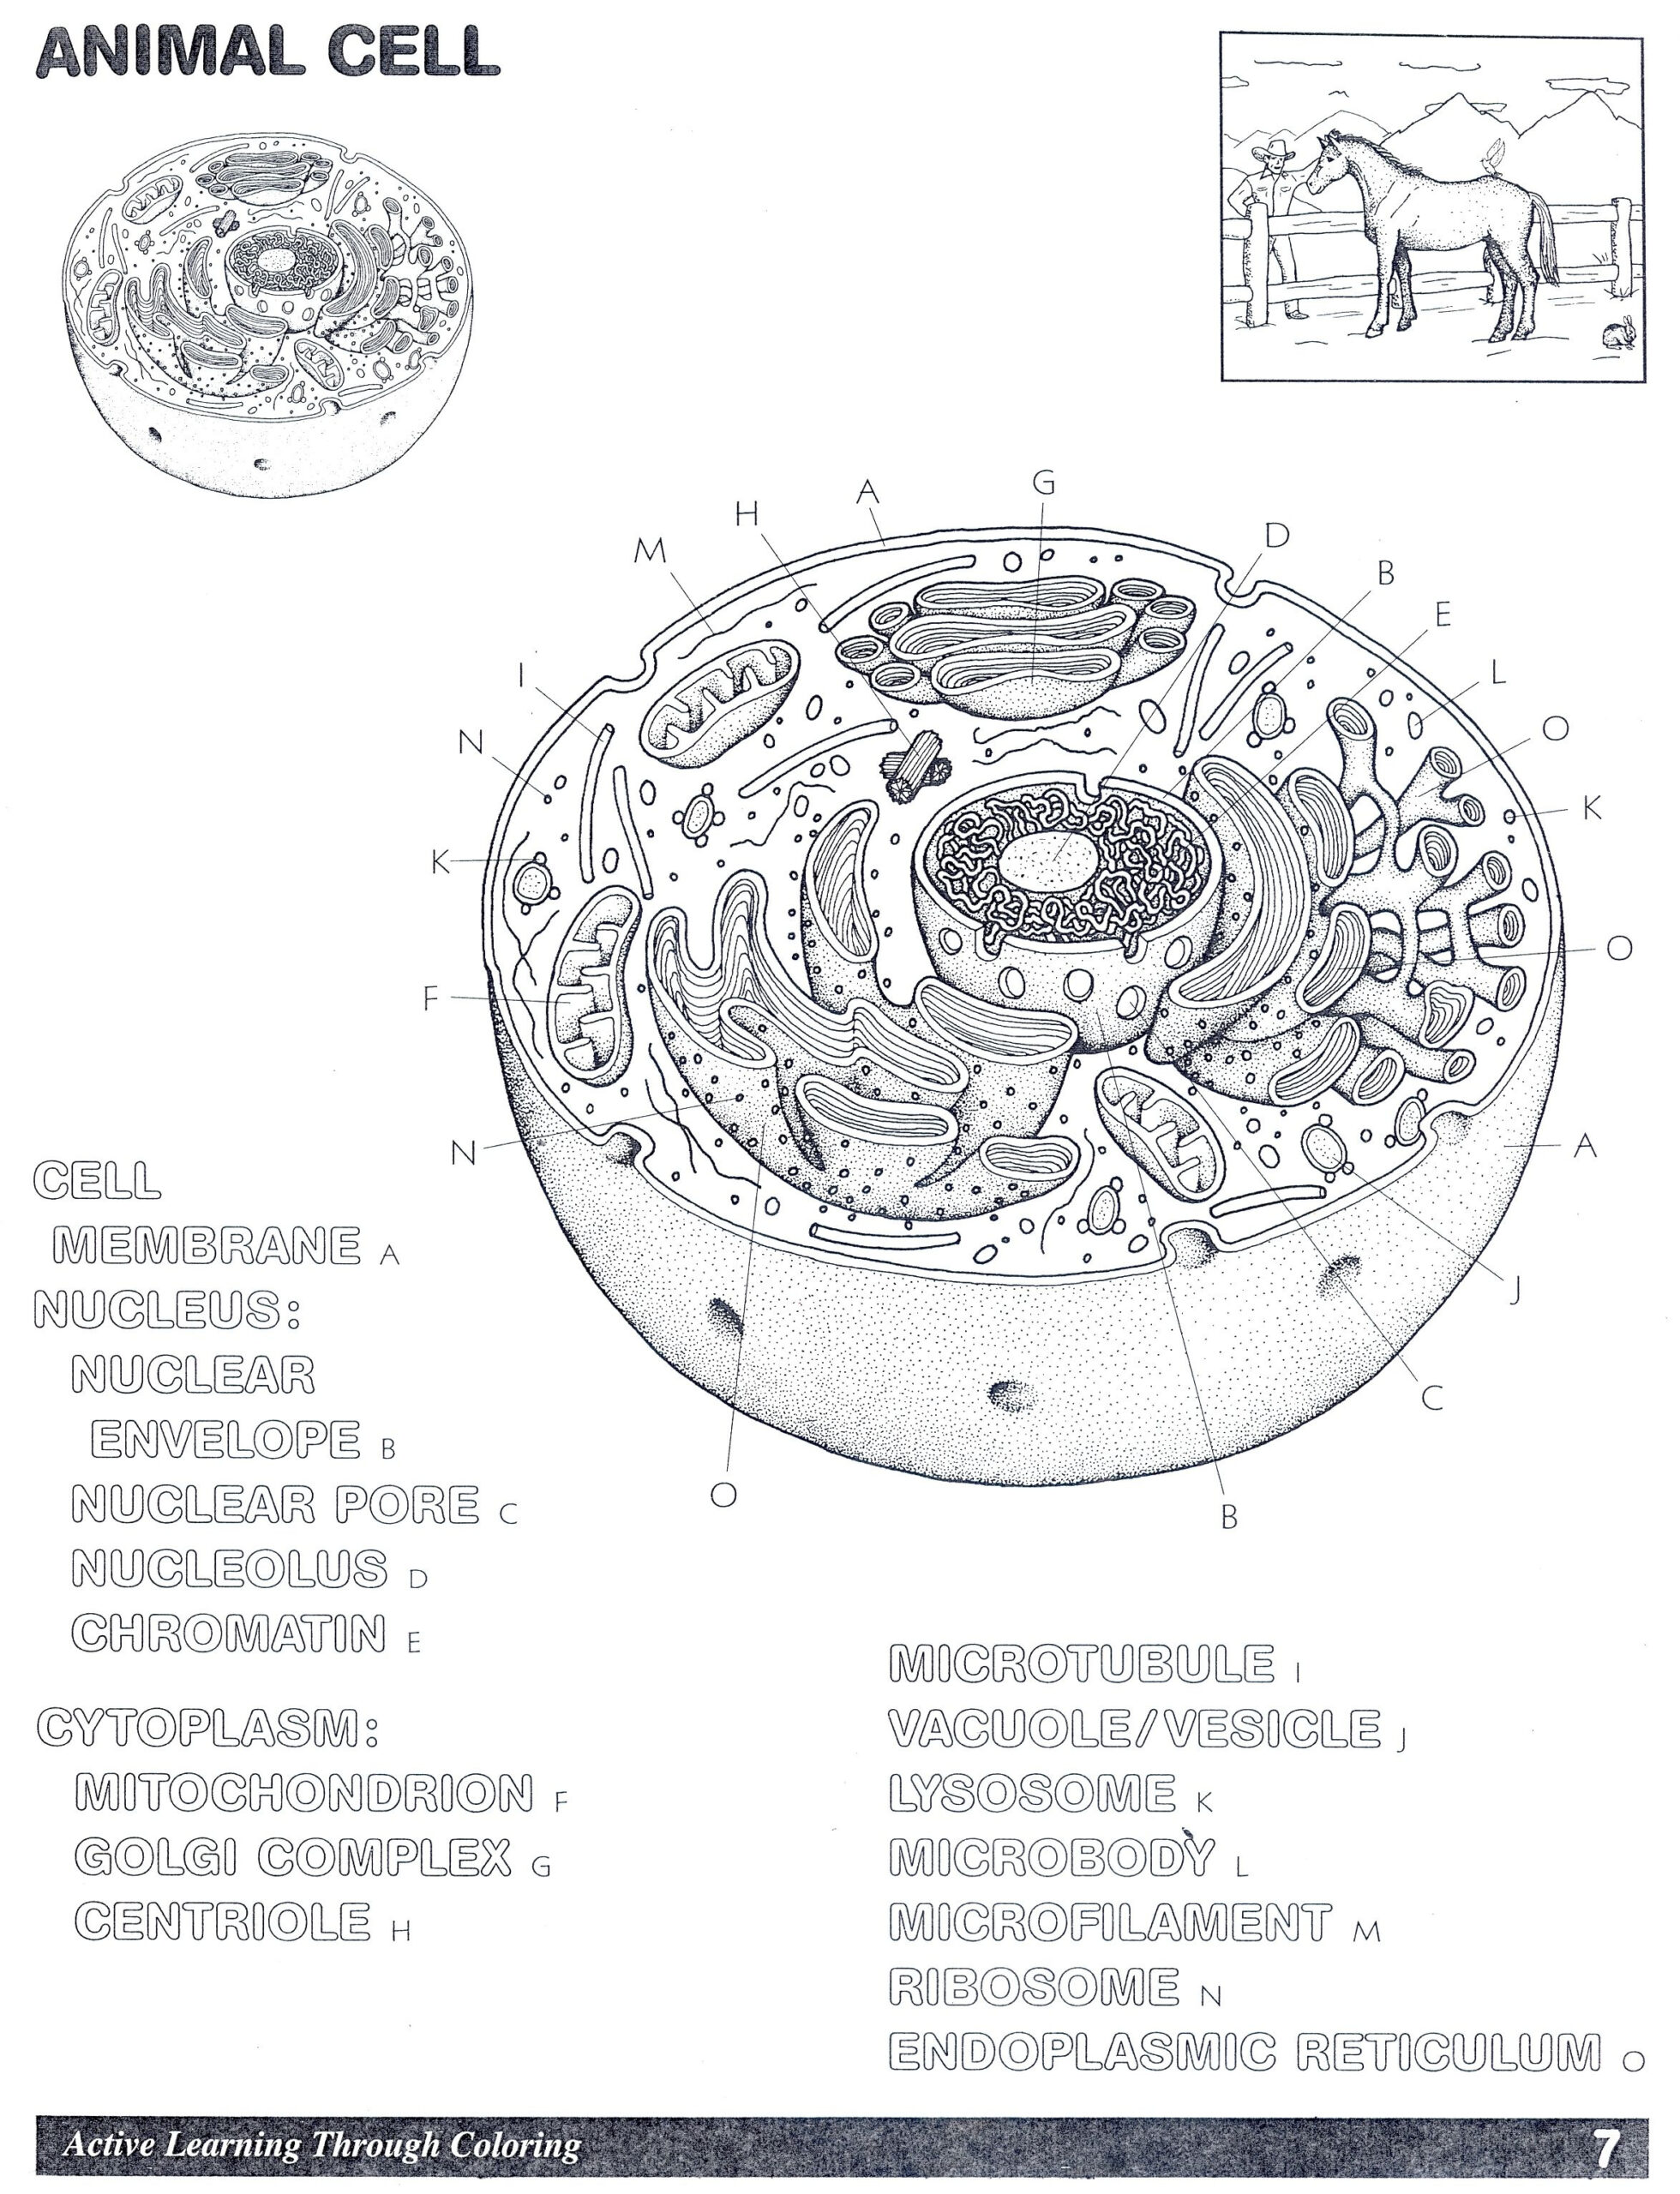 Animal Cell Diagram Plant Cells Worksheet Cell Diagram Cells Worksheet